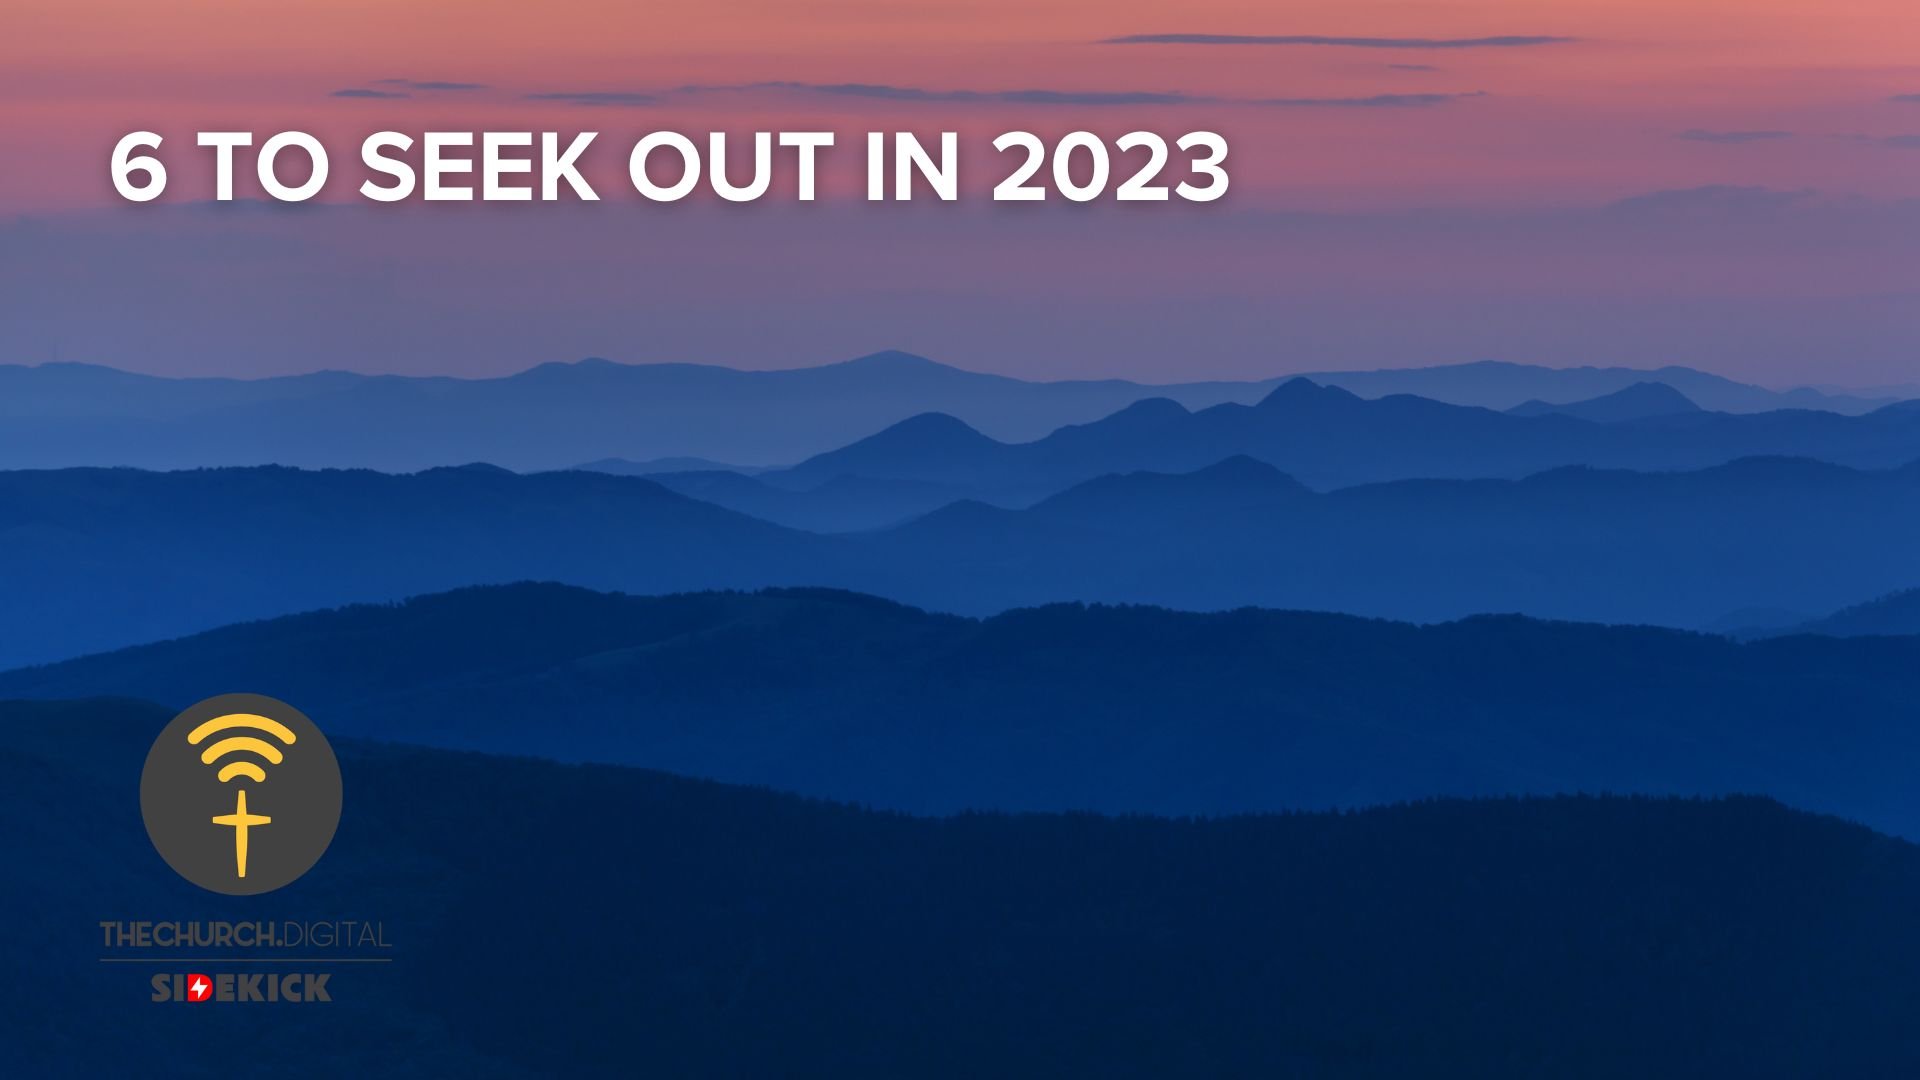 6 to Seek Out in 2023